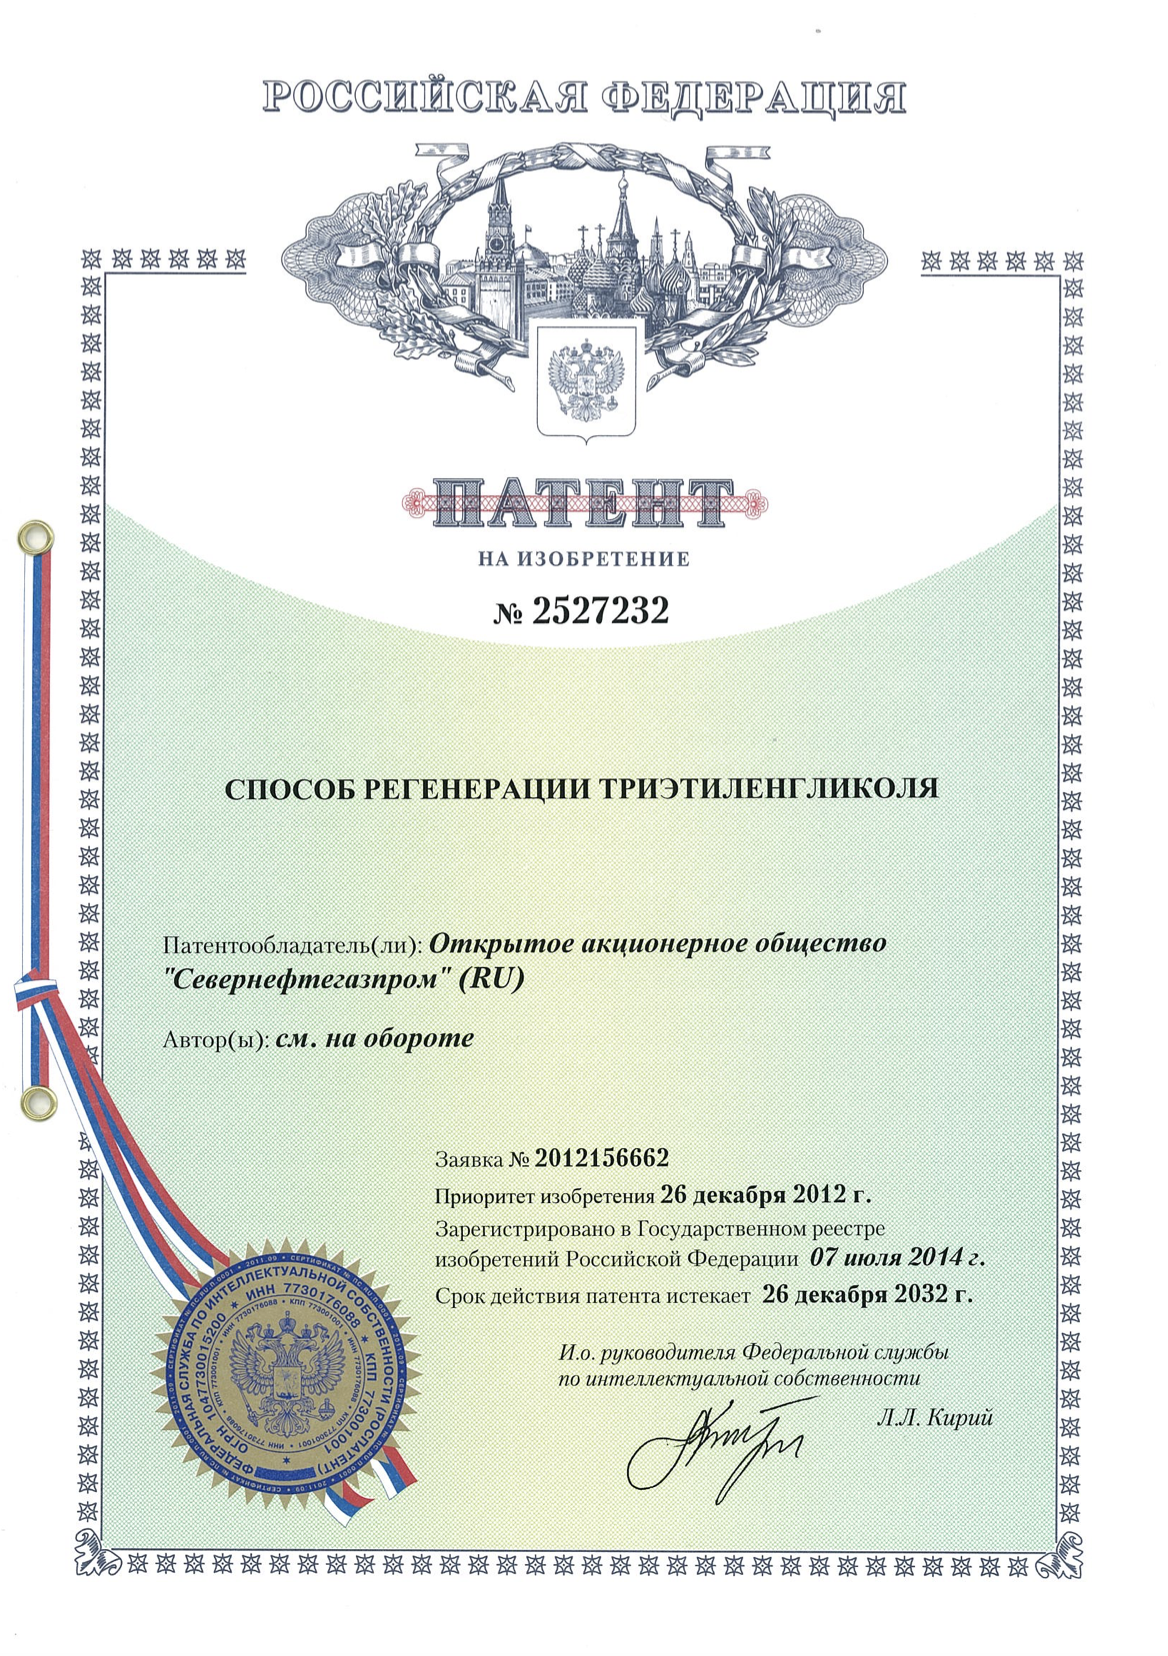 Patent for invention №2527232